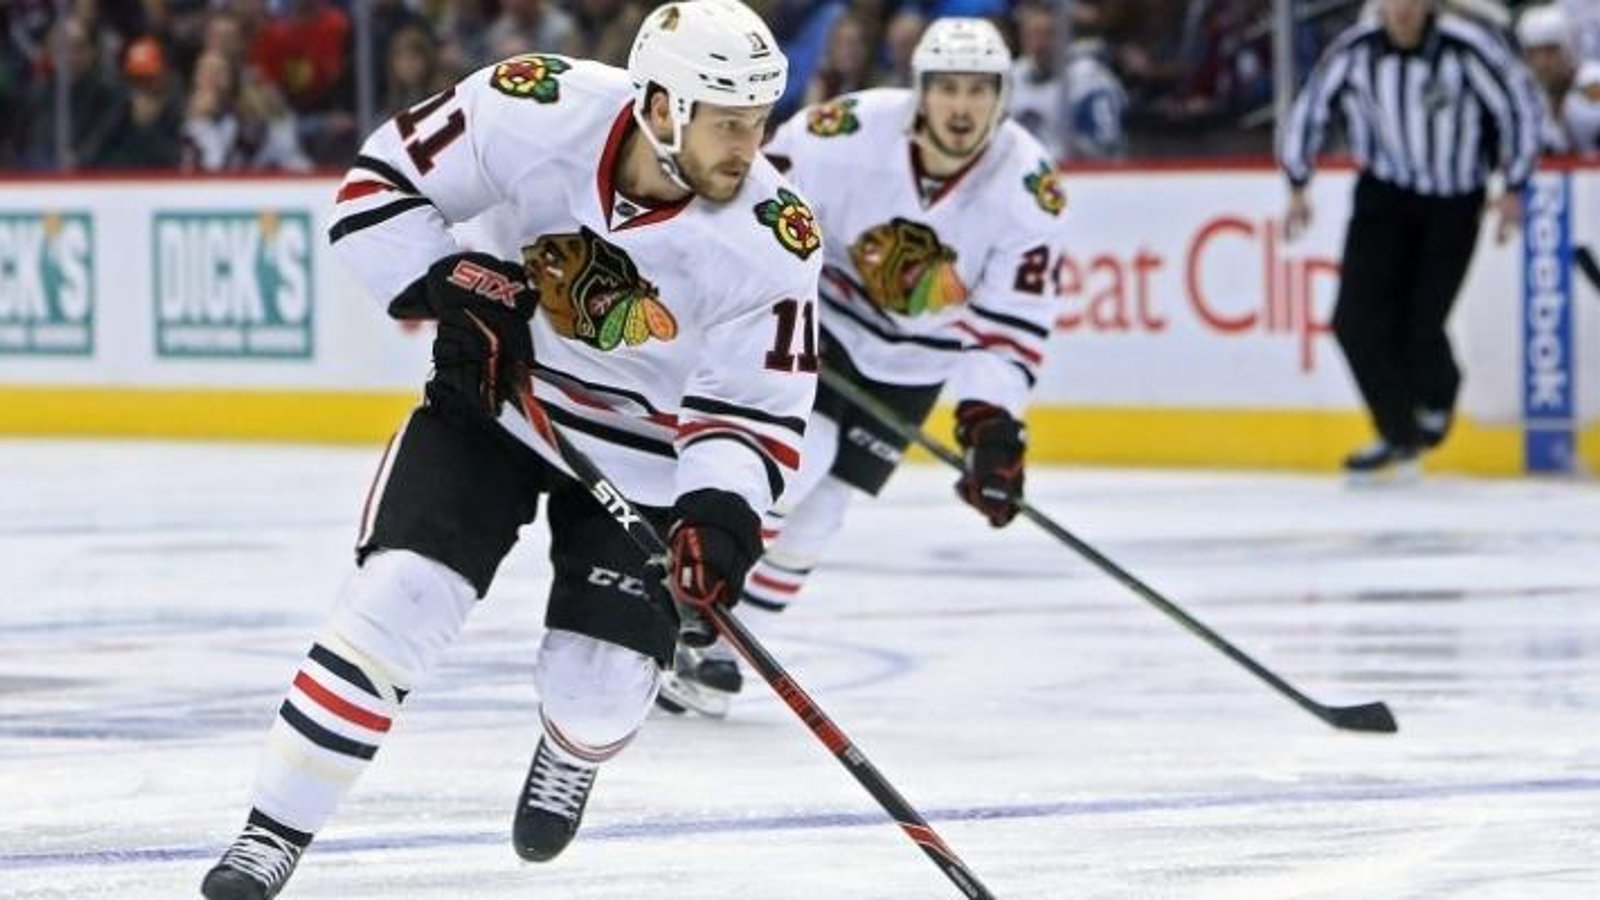 Key Players Behind the Success of the Blackhawks